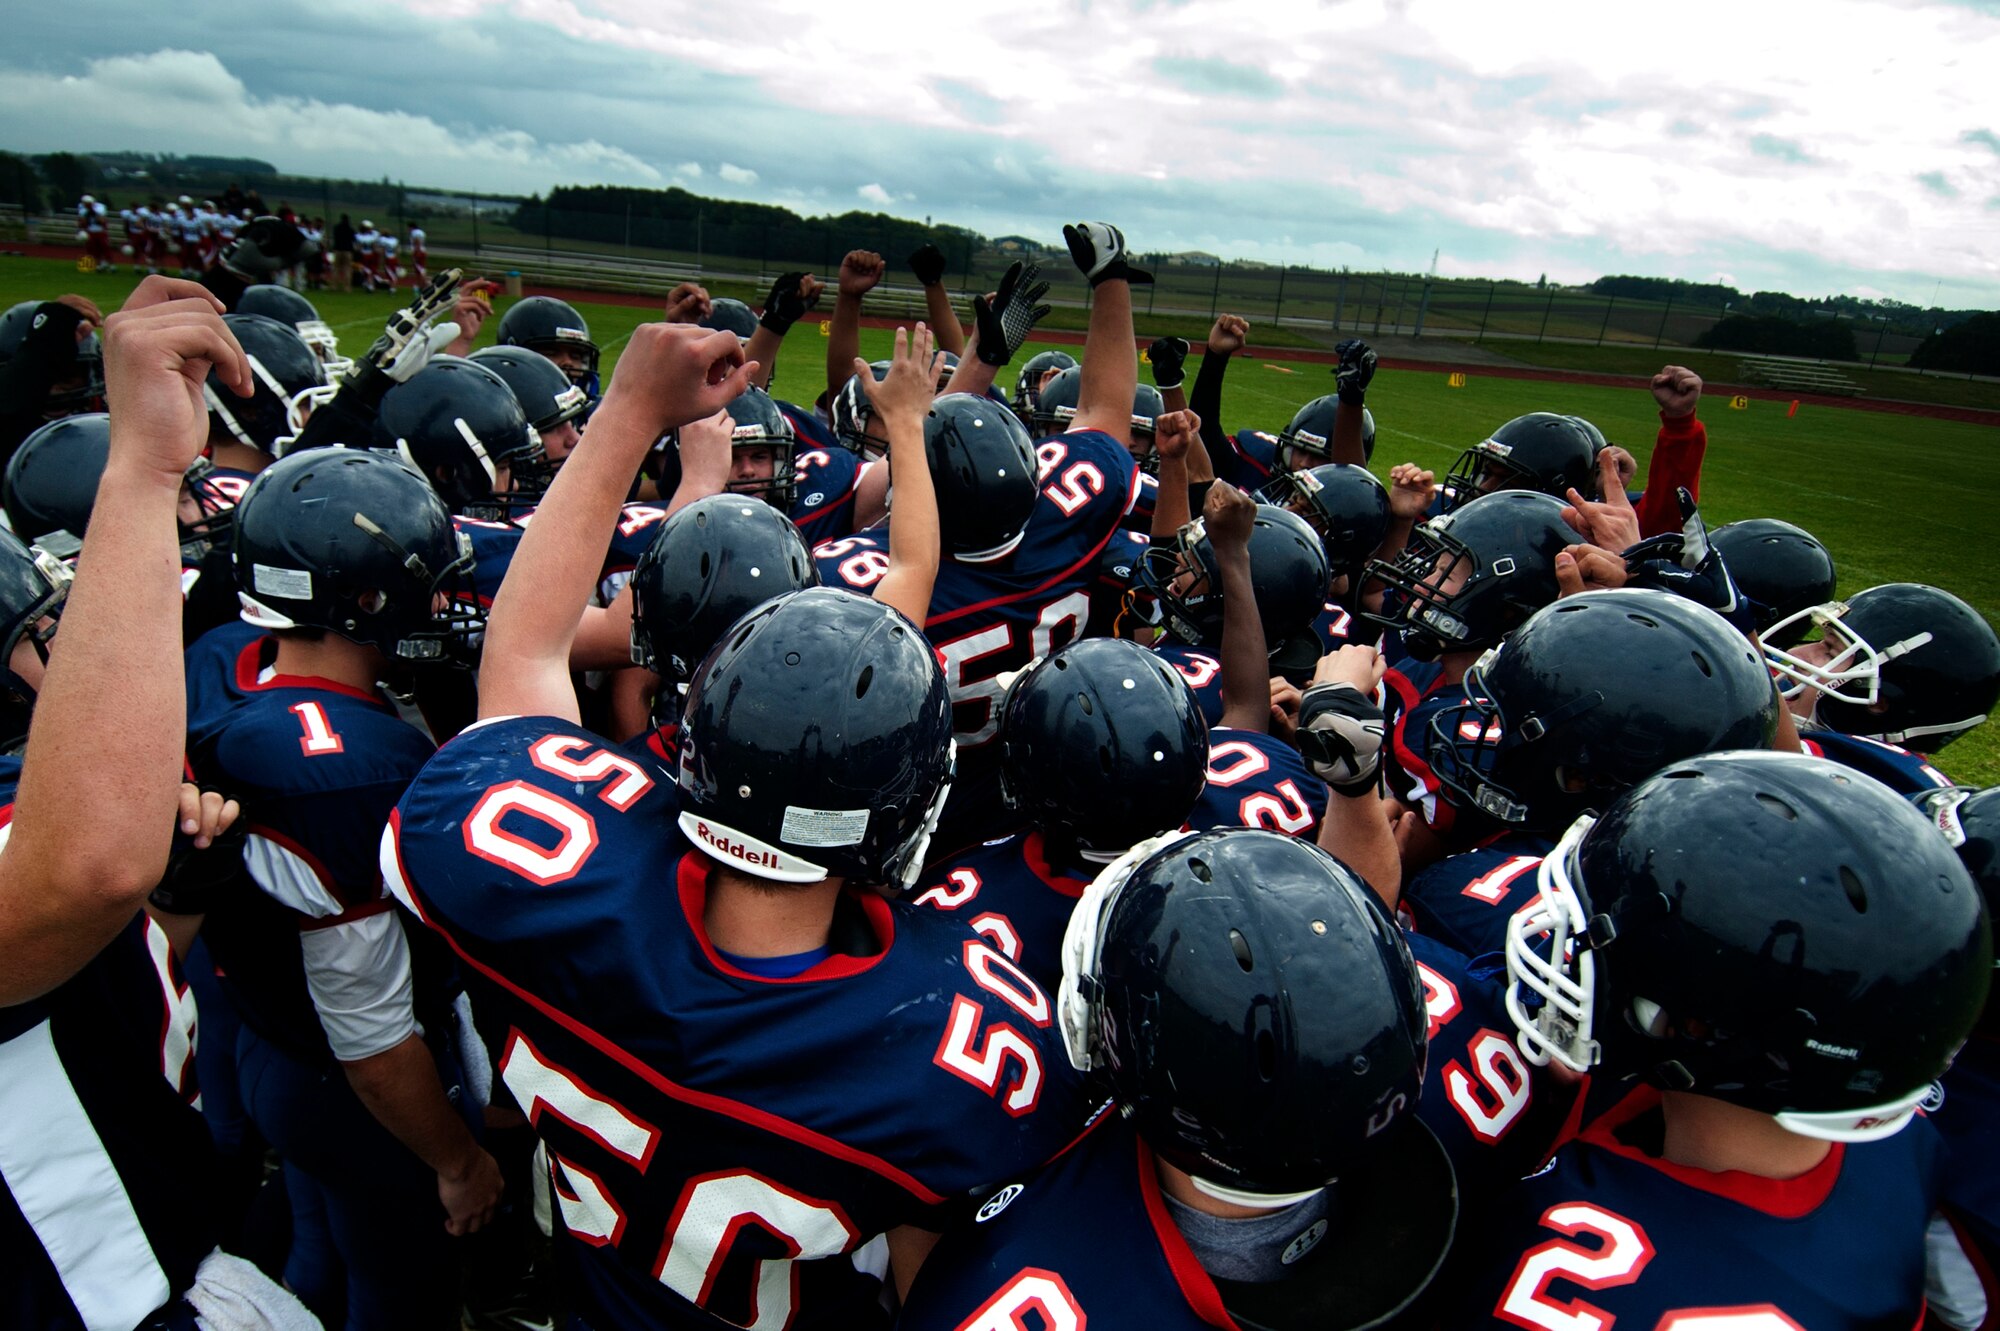 BITBURG ANNEX, Germany – The Bitburg Barons motivate each other before their game against the International School of Brussels Raiders at Bitburg High School Sept. 29.  The referees stopped the homecoming game at the half after the Barons achieved a commanding lead of 42-0. (U.S. Air Force photo by Airman 1st Class Gustavo Castillo/Released)